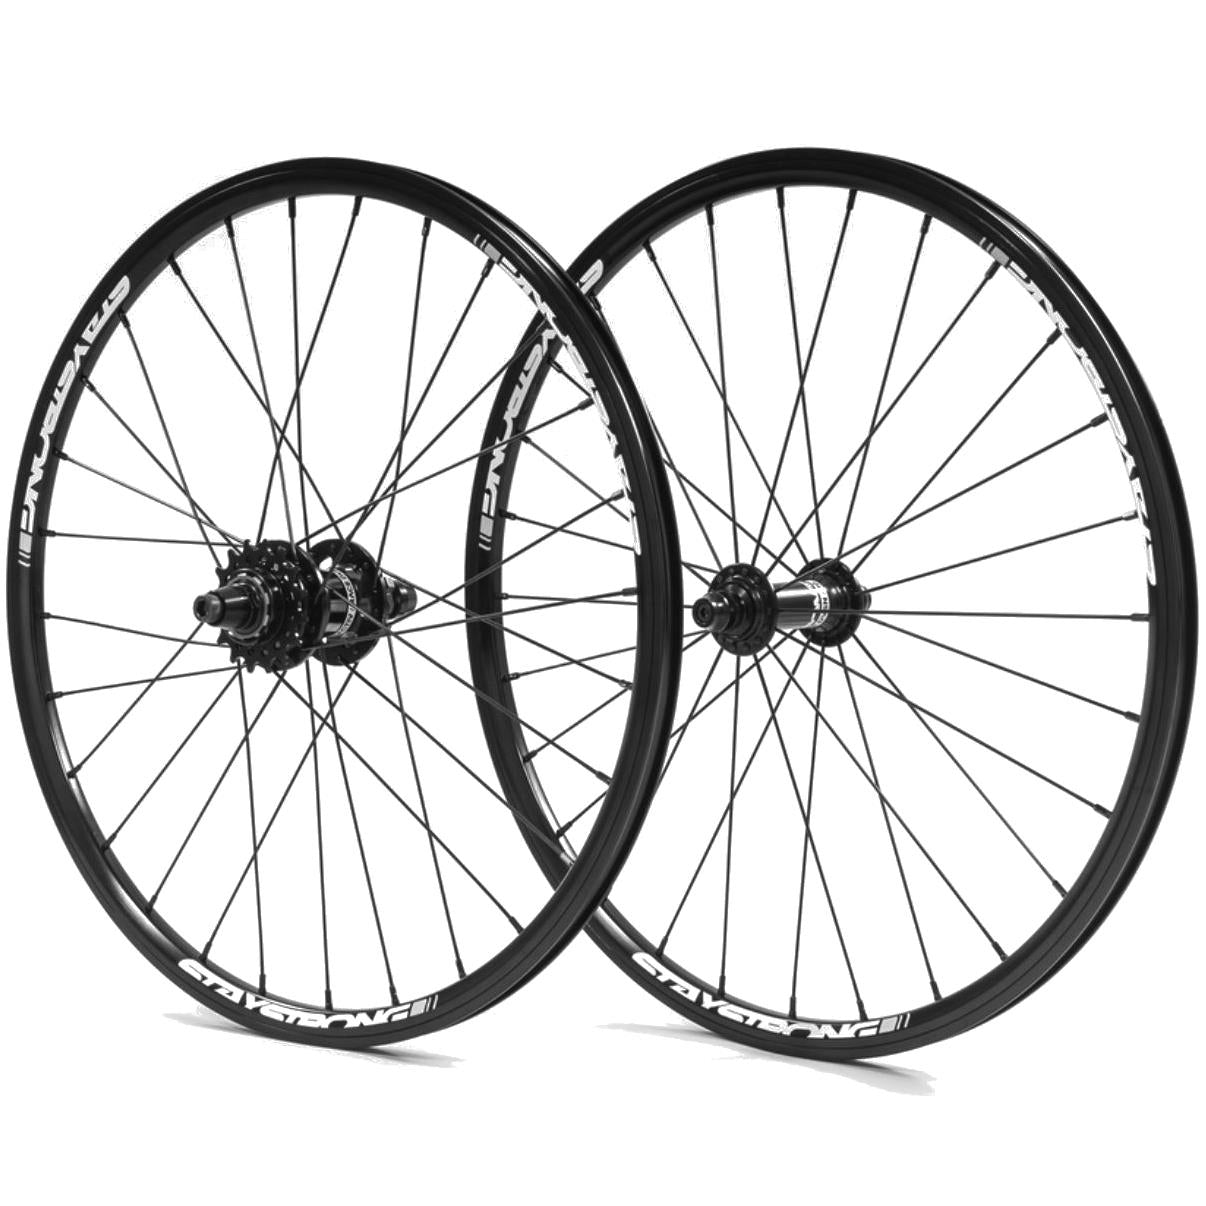 Stay Strong Reactiv Race 20" Disc 1.1-1/8"" Wheelset